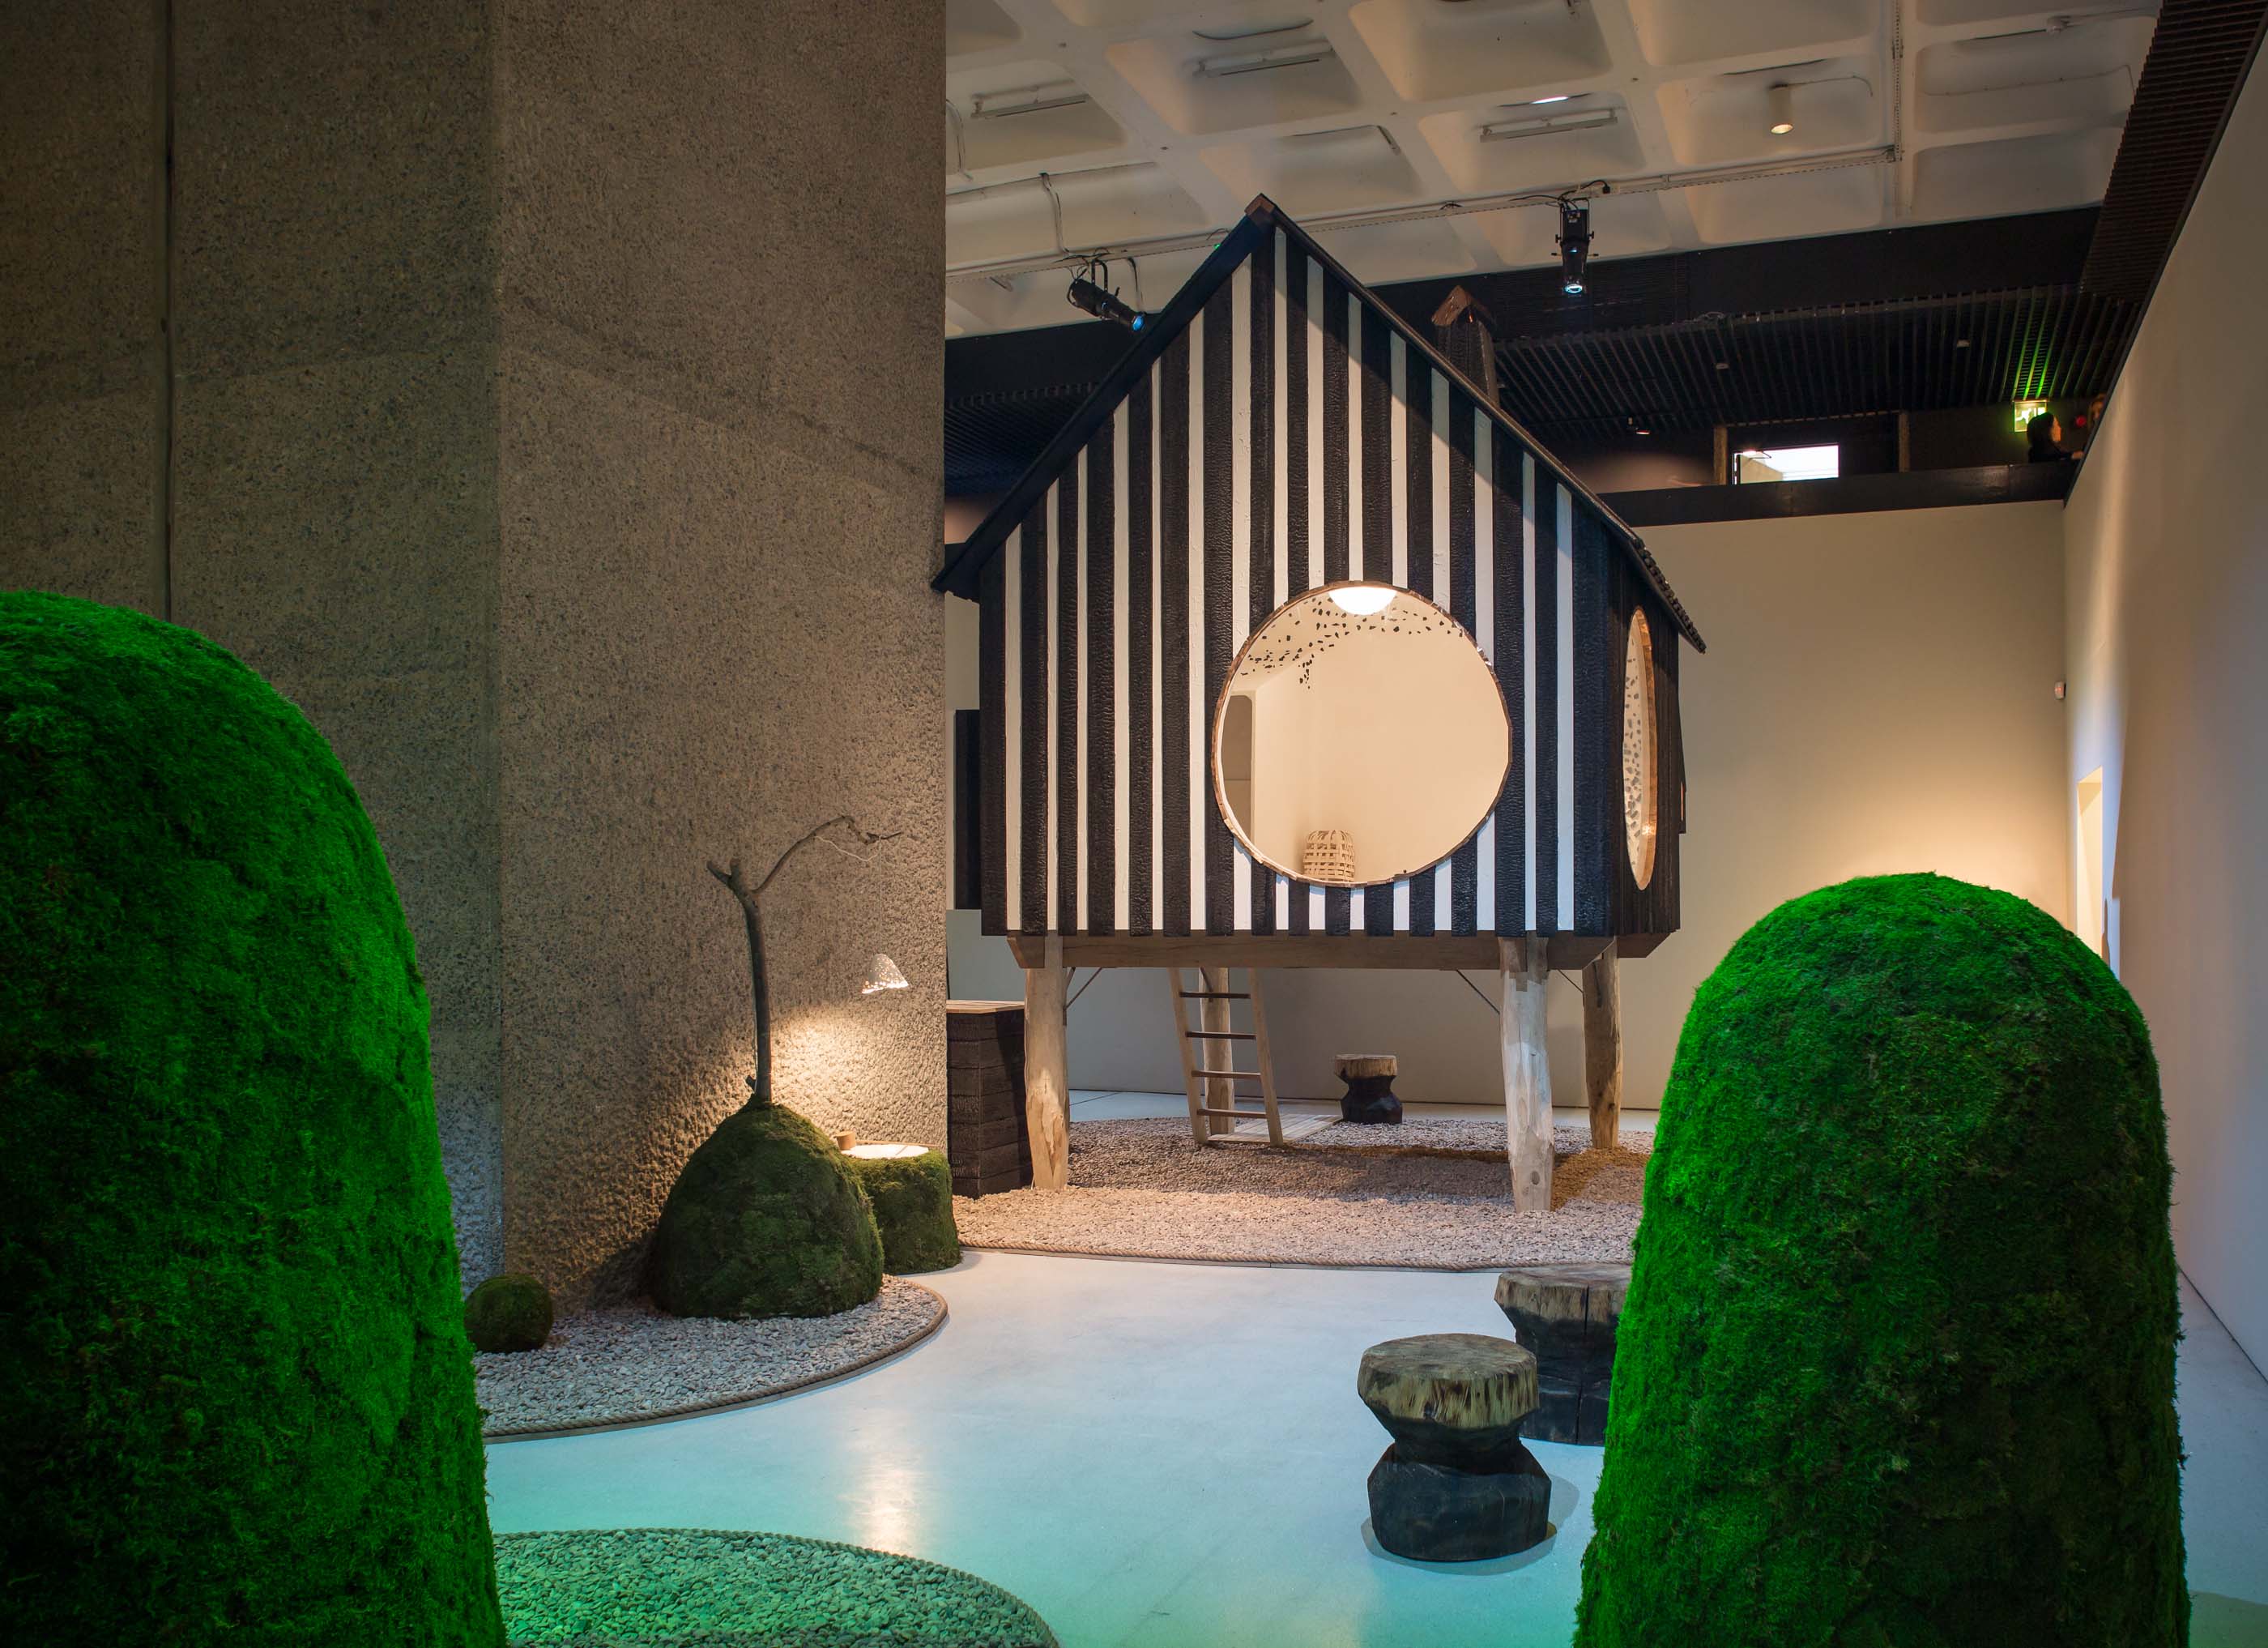 The Japanese House, Architecture and Life after 1945, Installation, Miles Willis, Getty Images